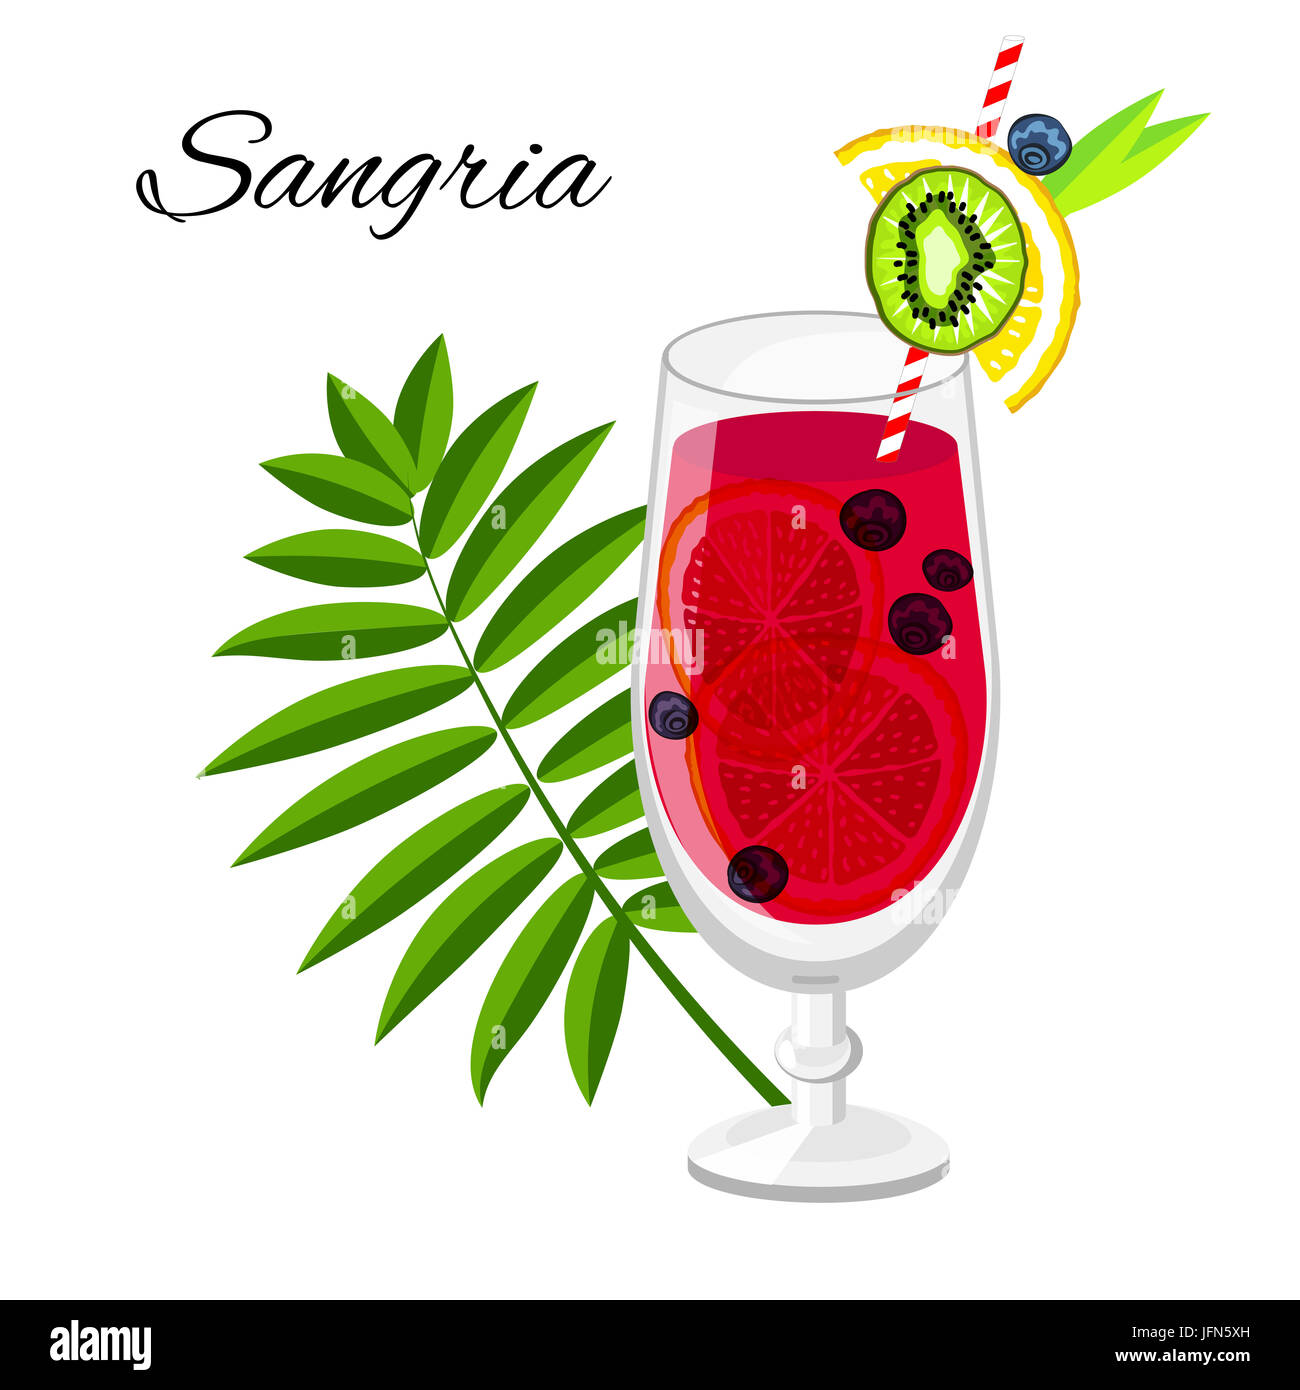 Sangria fruit cocktail cartoon style. Summer long drink isolated on white for restaurant, bar menu or beach party banner and flyer Stock Photo